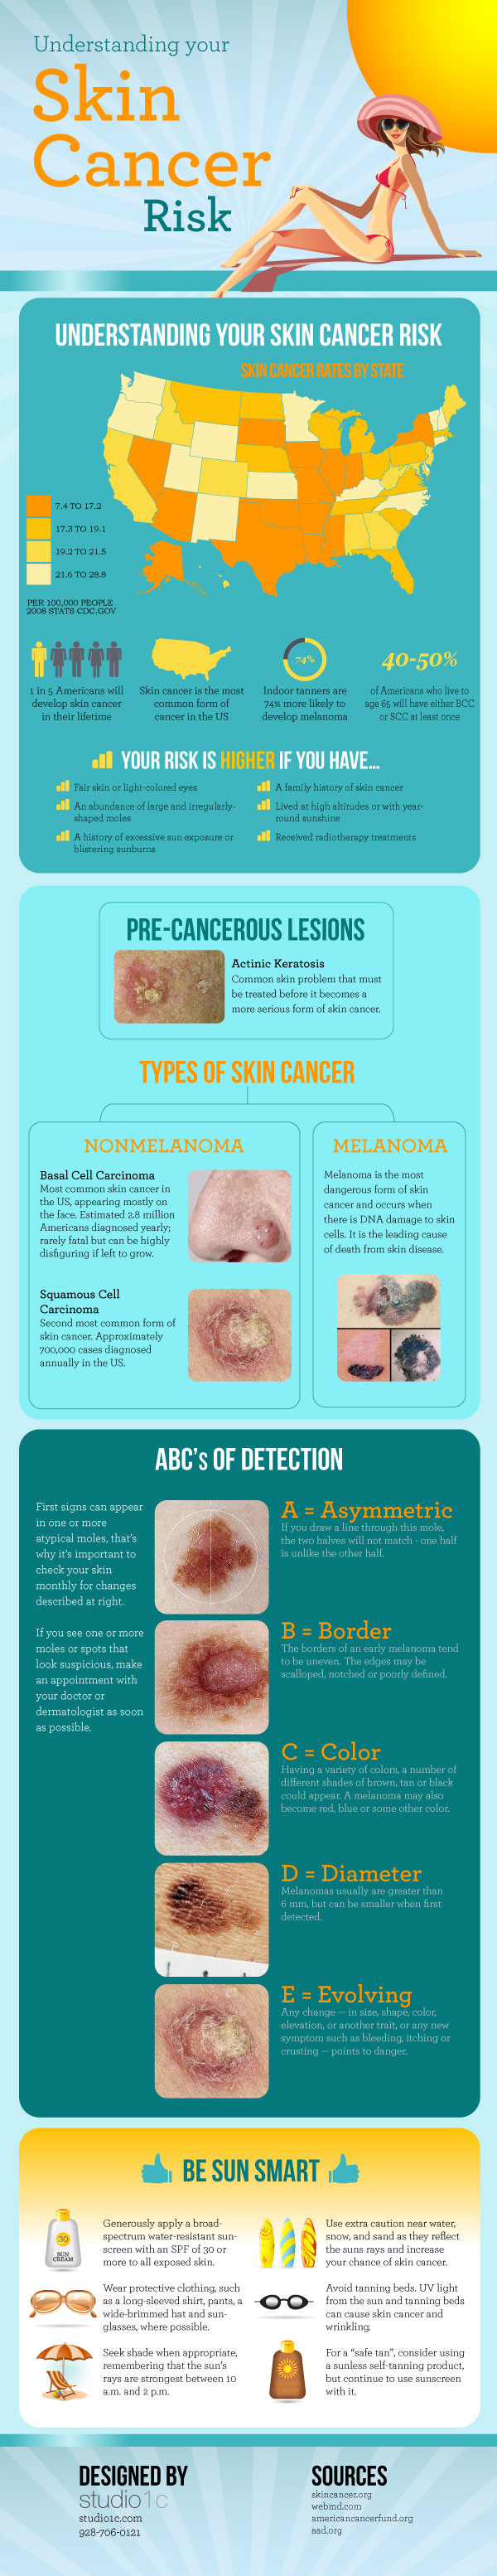 skin cancer detection infographic